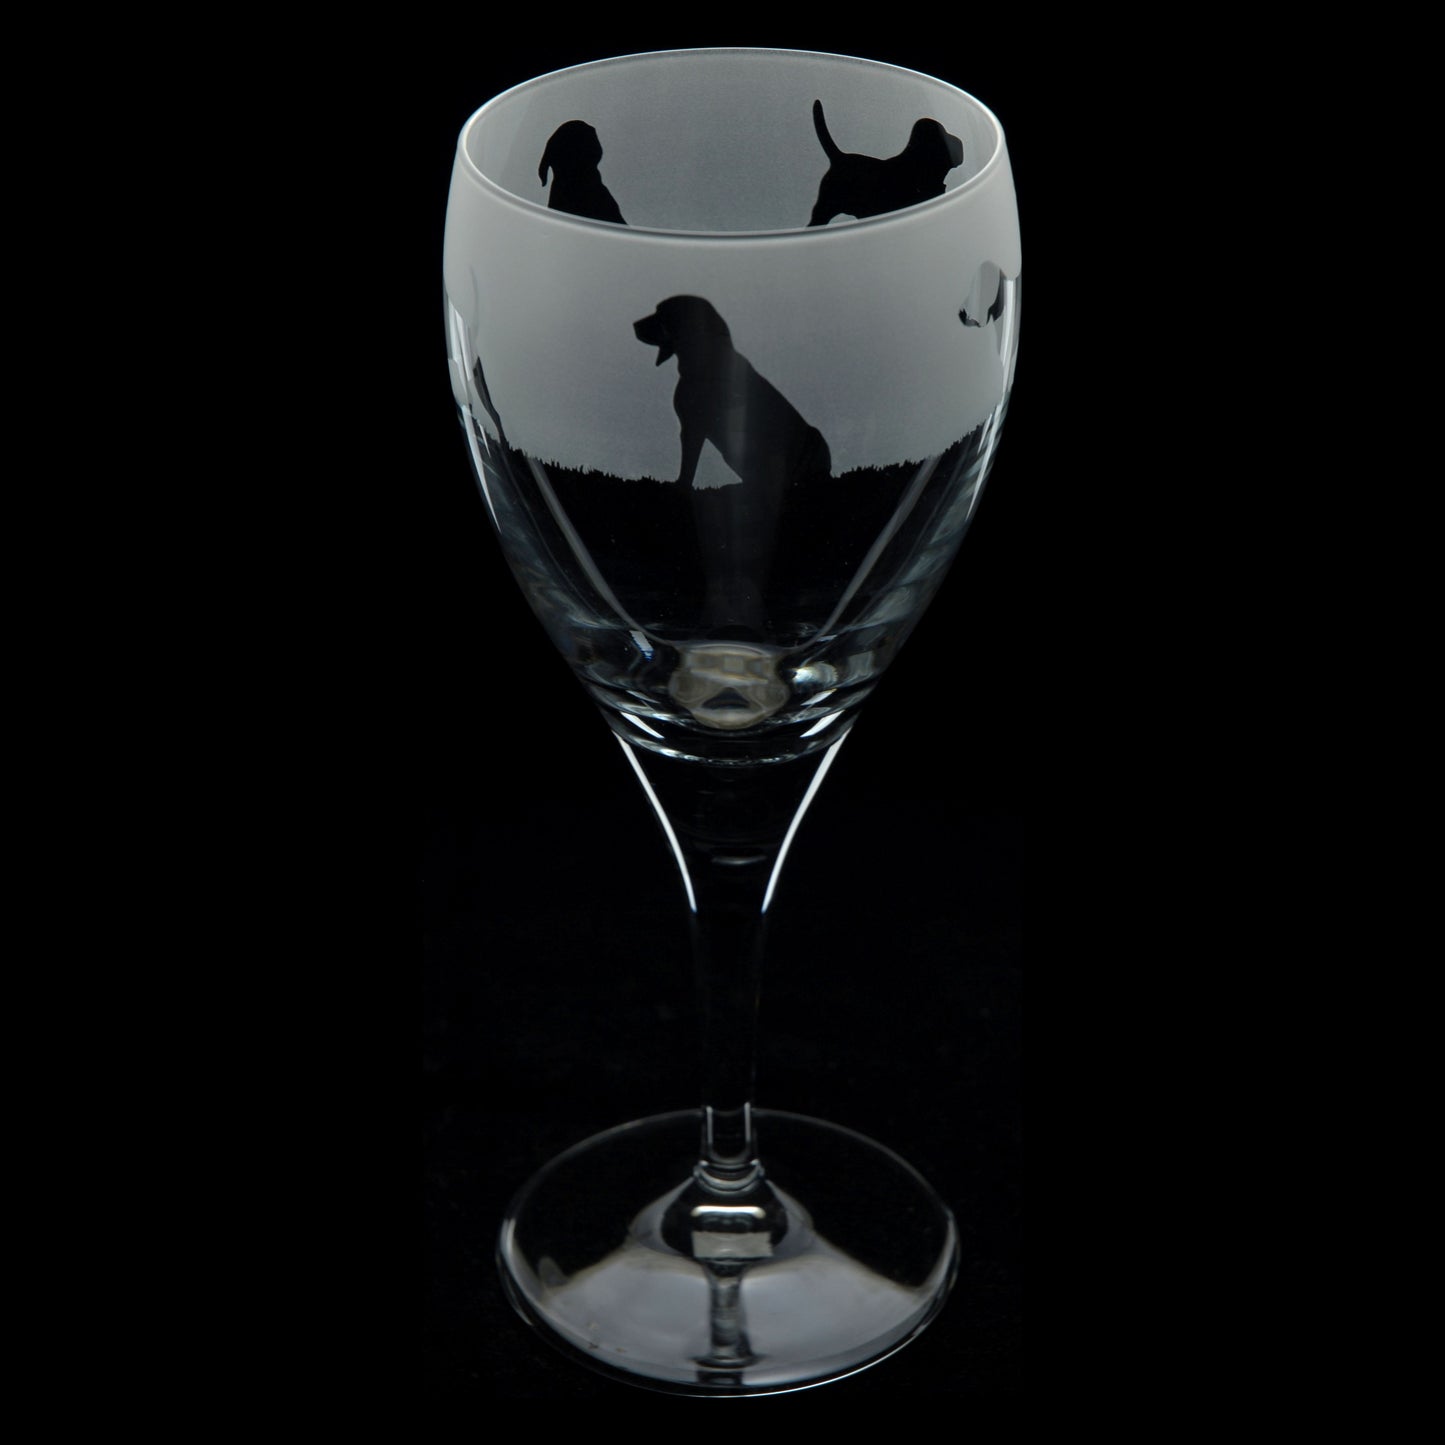 Beagle Dog Crystal Wine Glass - Hand Etched/Engraved Gift